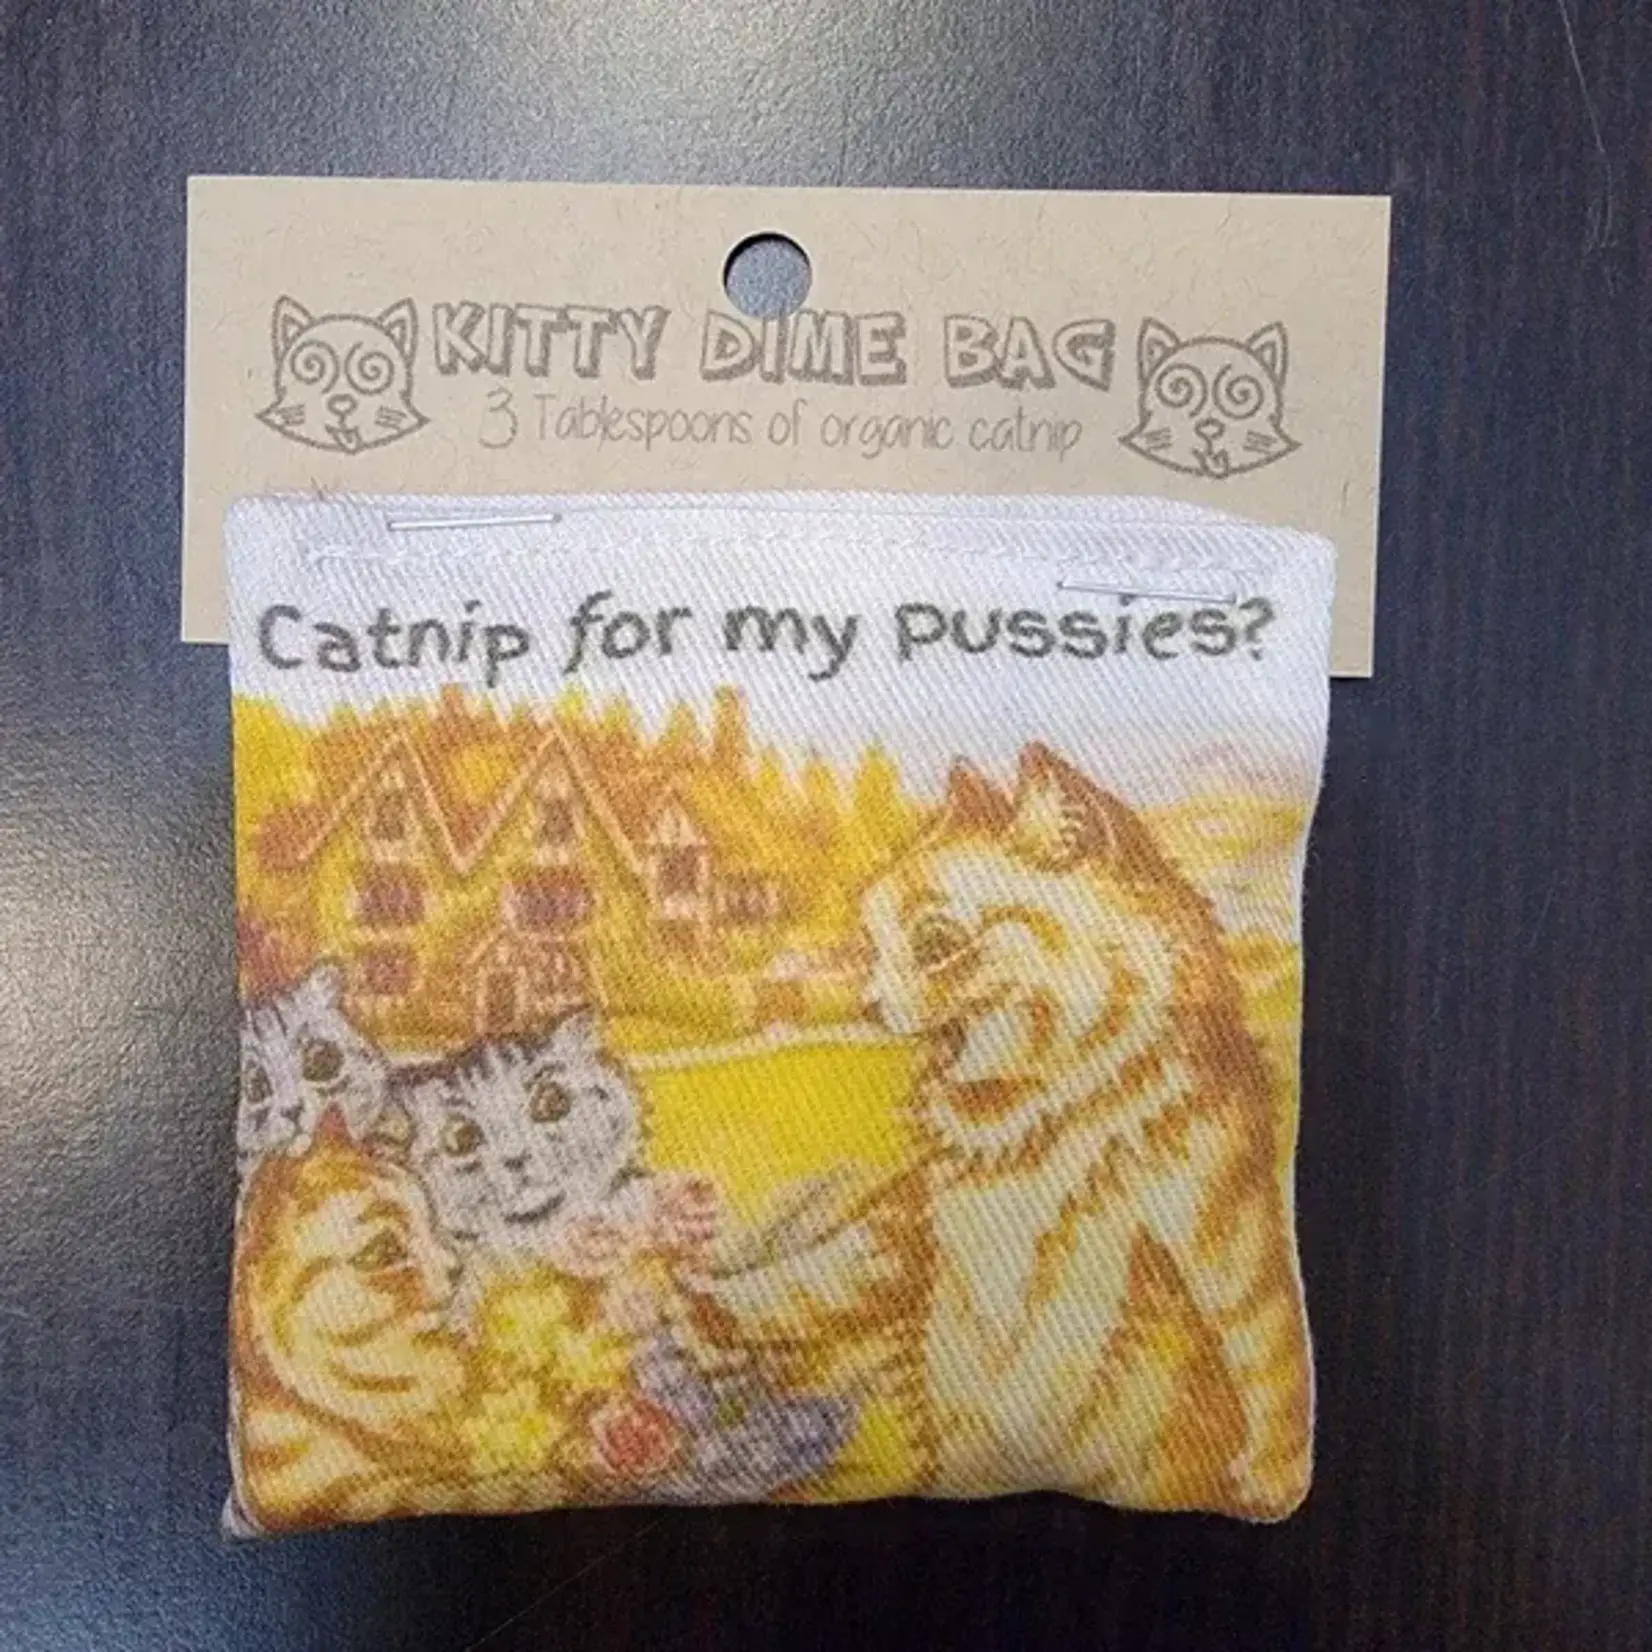 Catnip Pouch - Catnip For My Pussies?